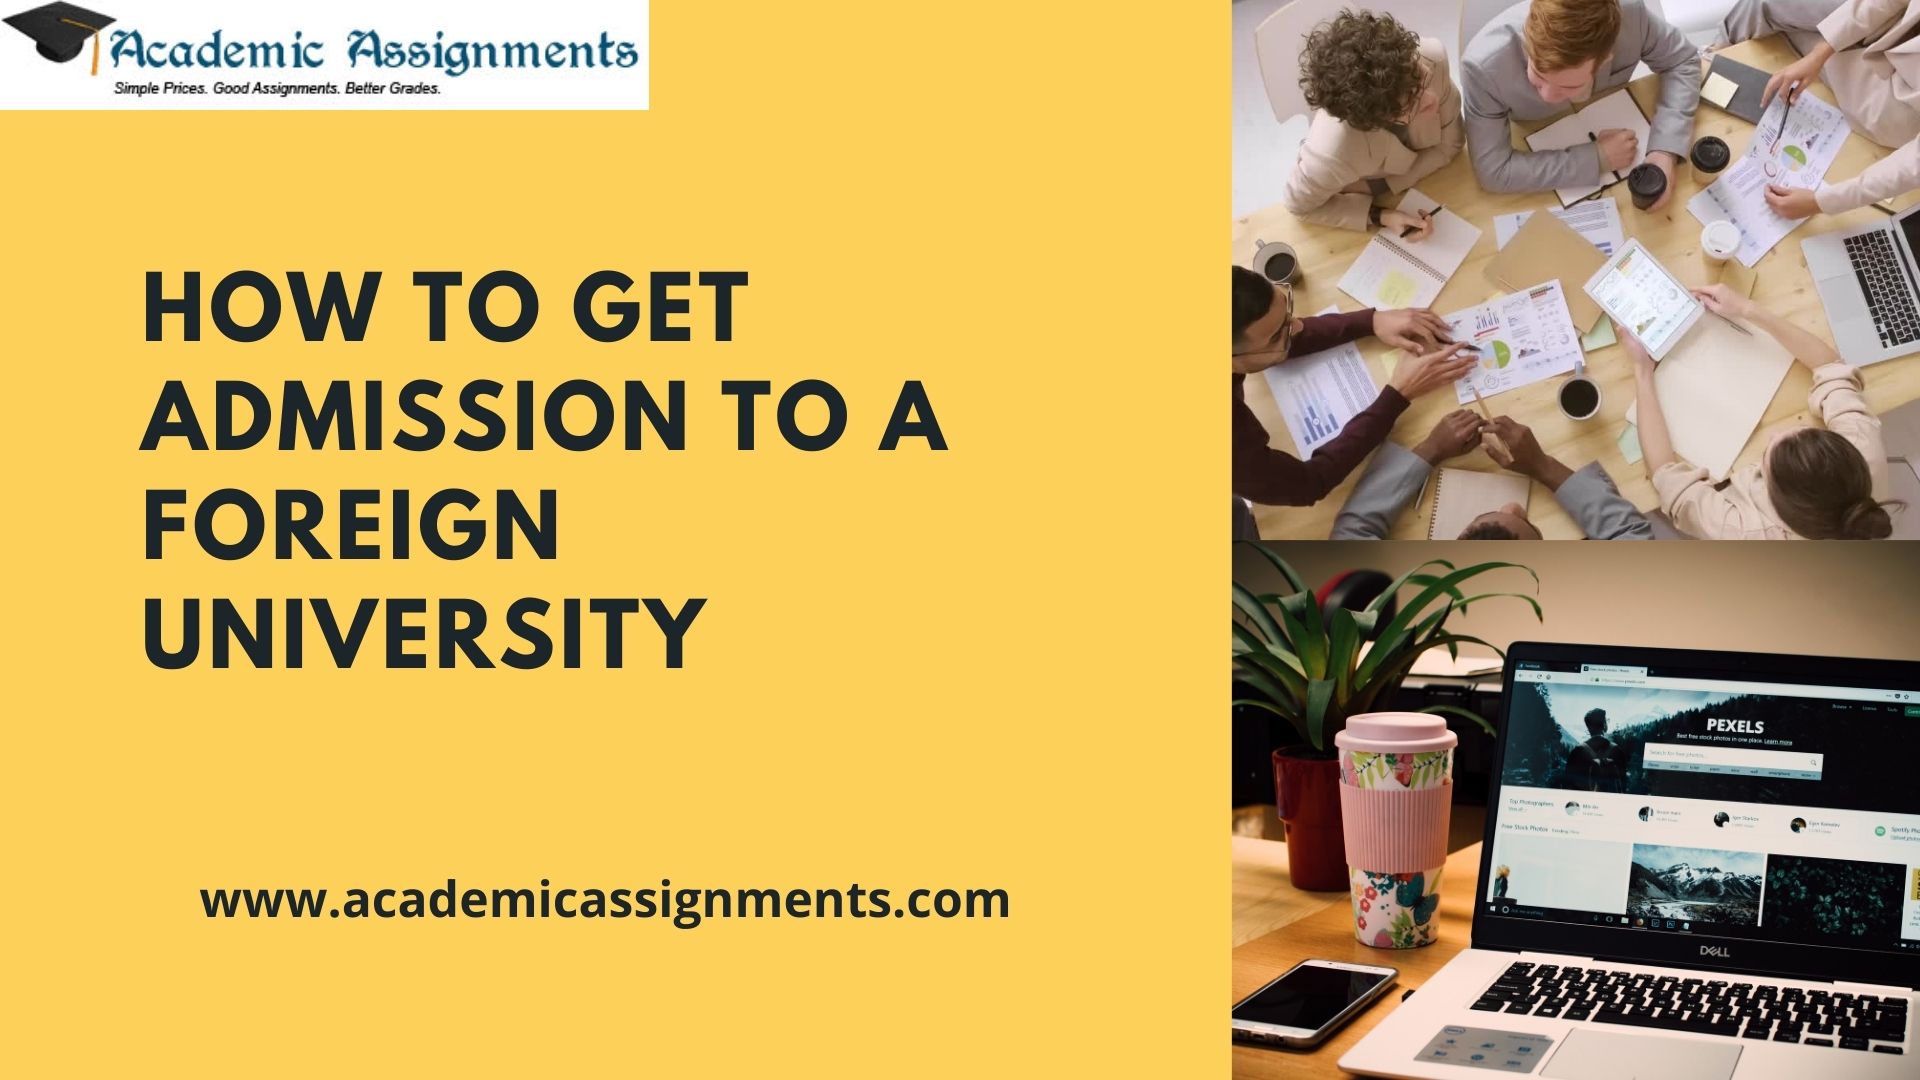 HOW TO GET ADMISSION TO A FOREIGN UNIVERSITY